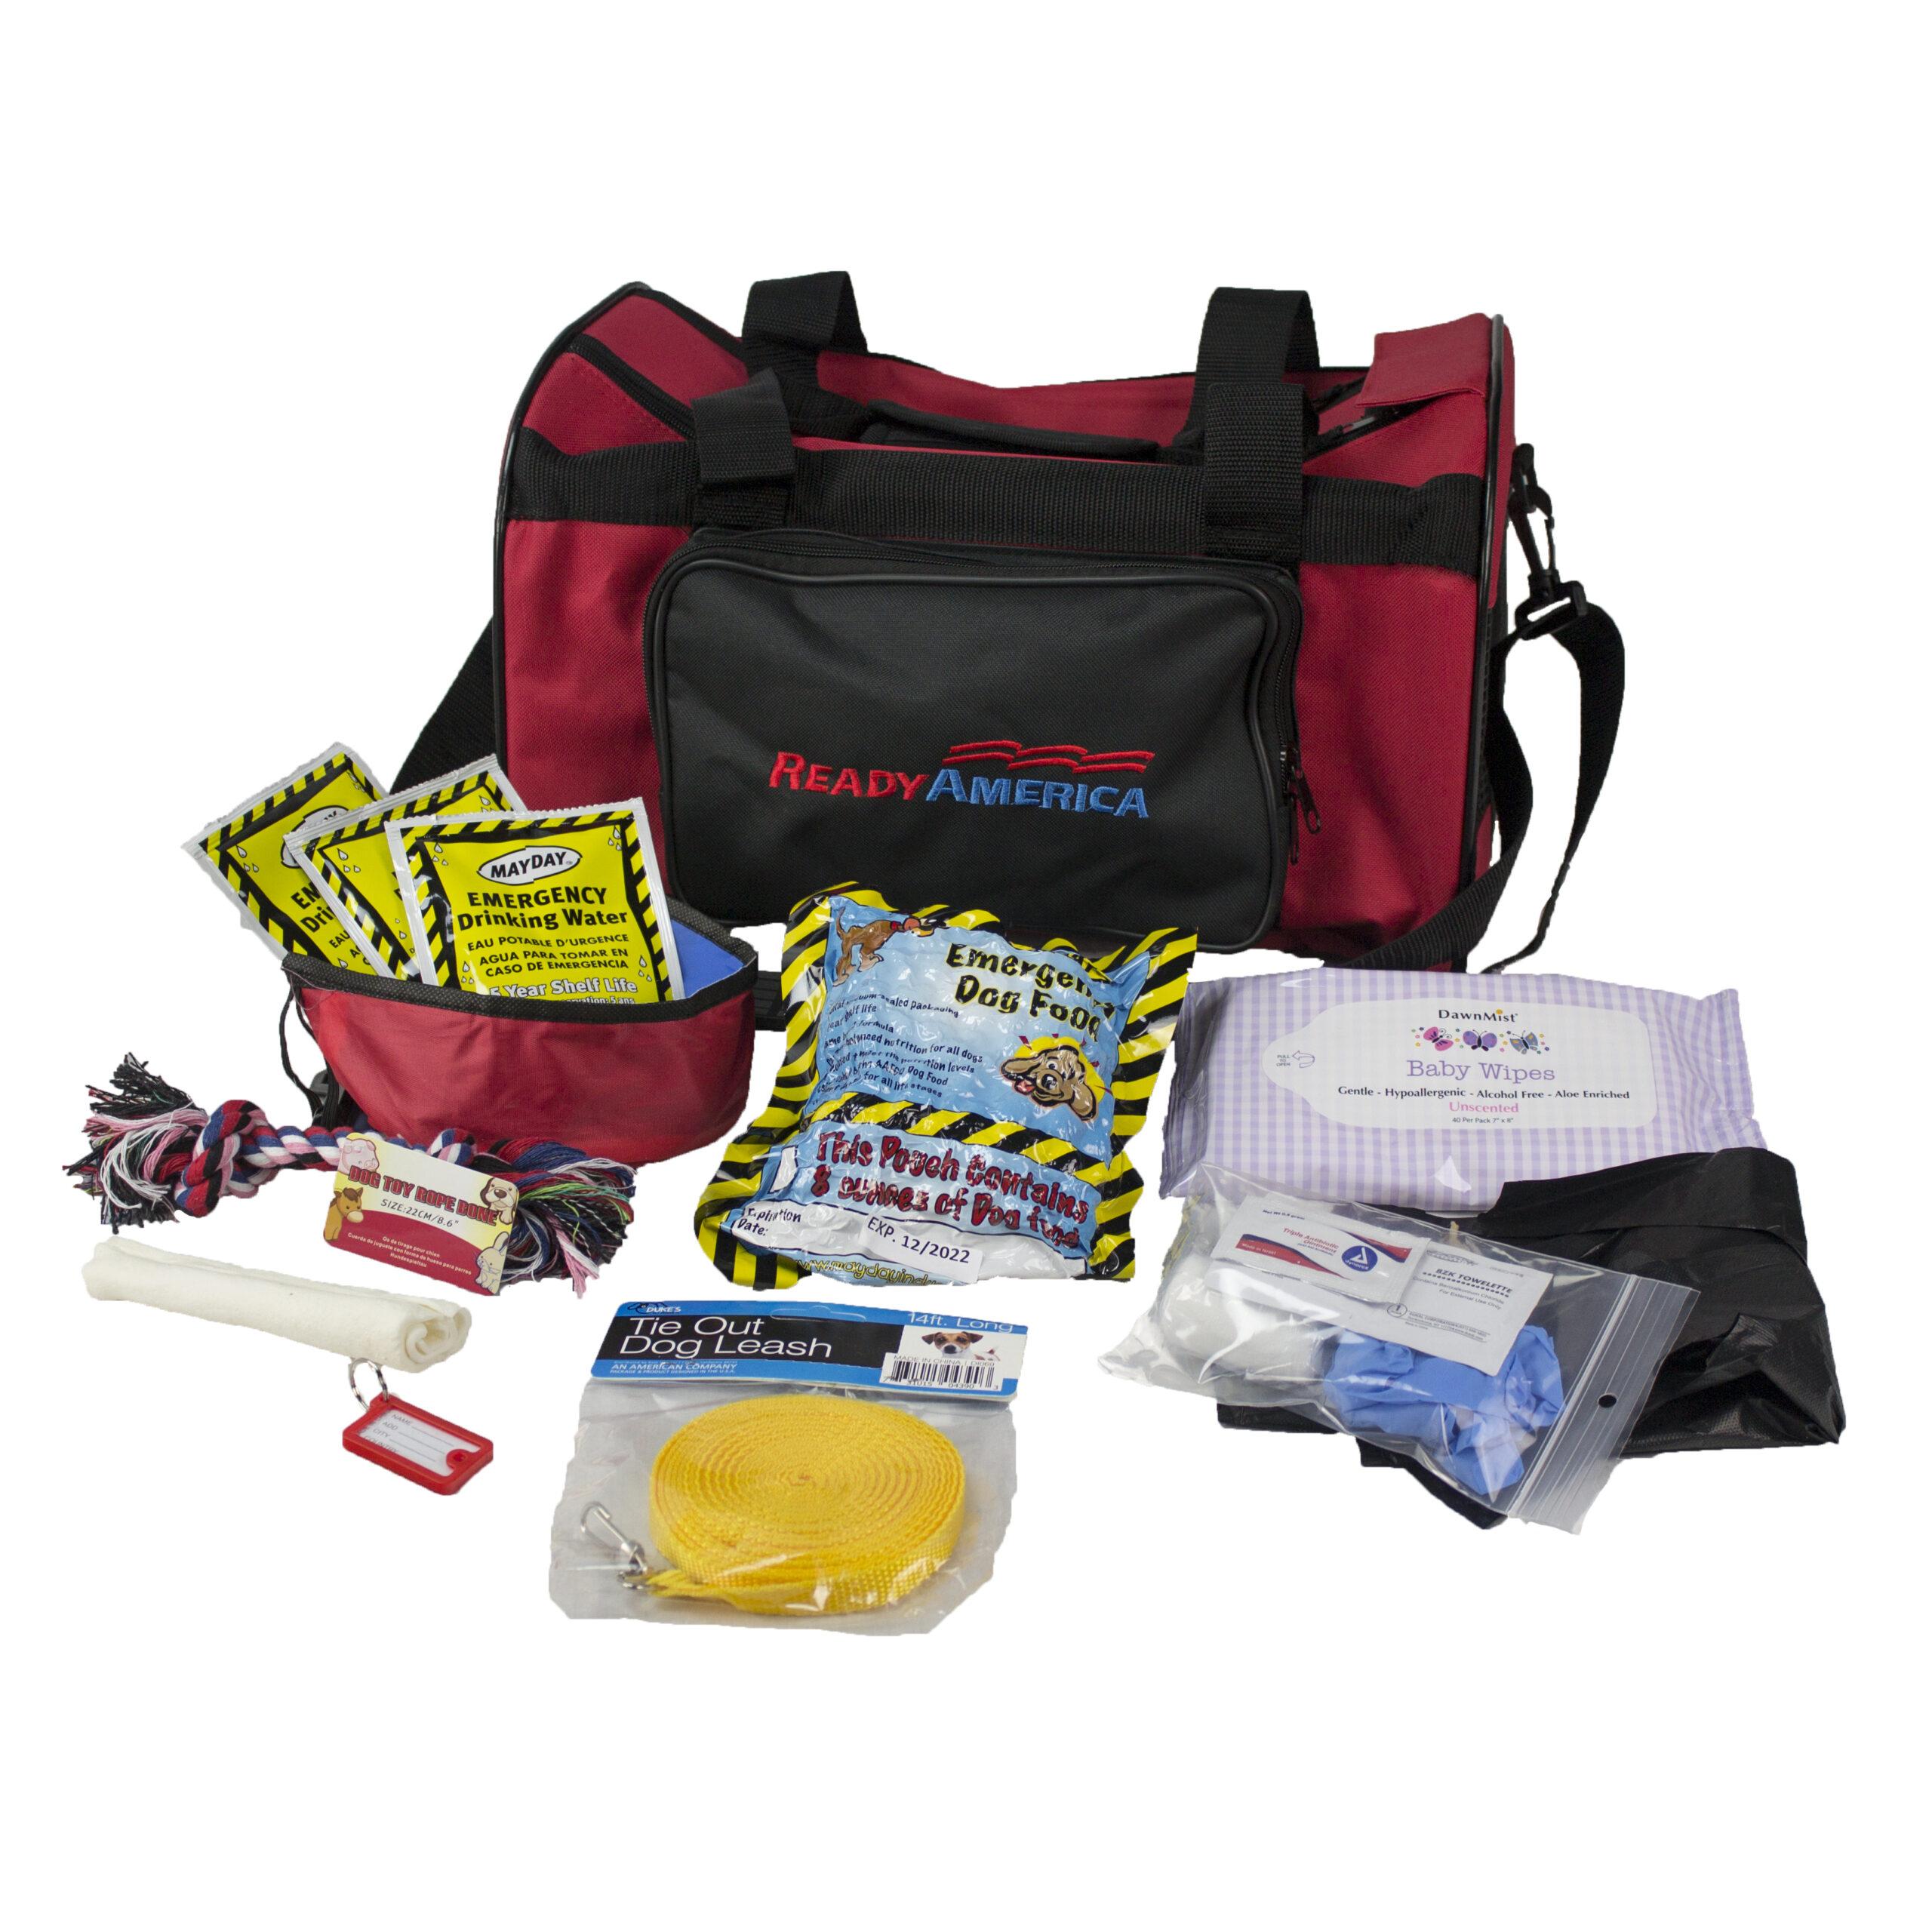 77 PIECES Survival Kit Supplies, First Aid Kit, Go Bag, Emergency